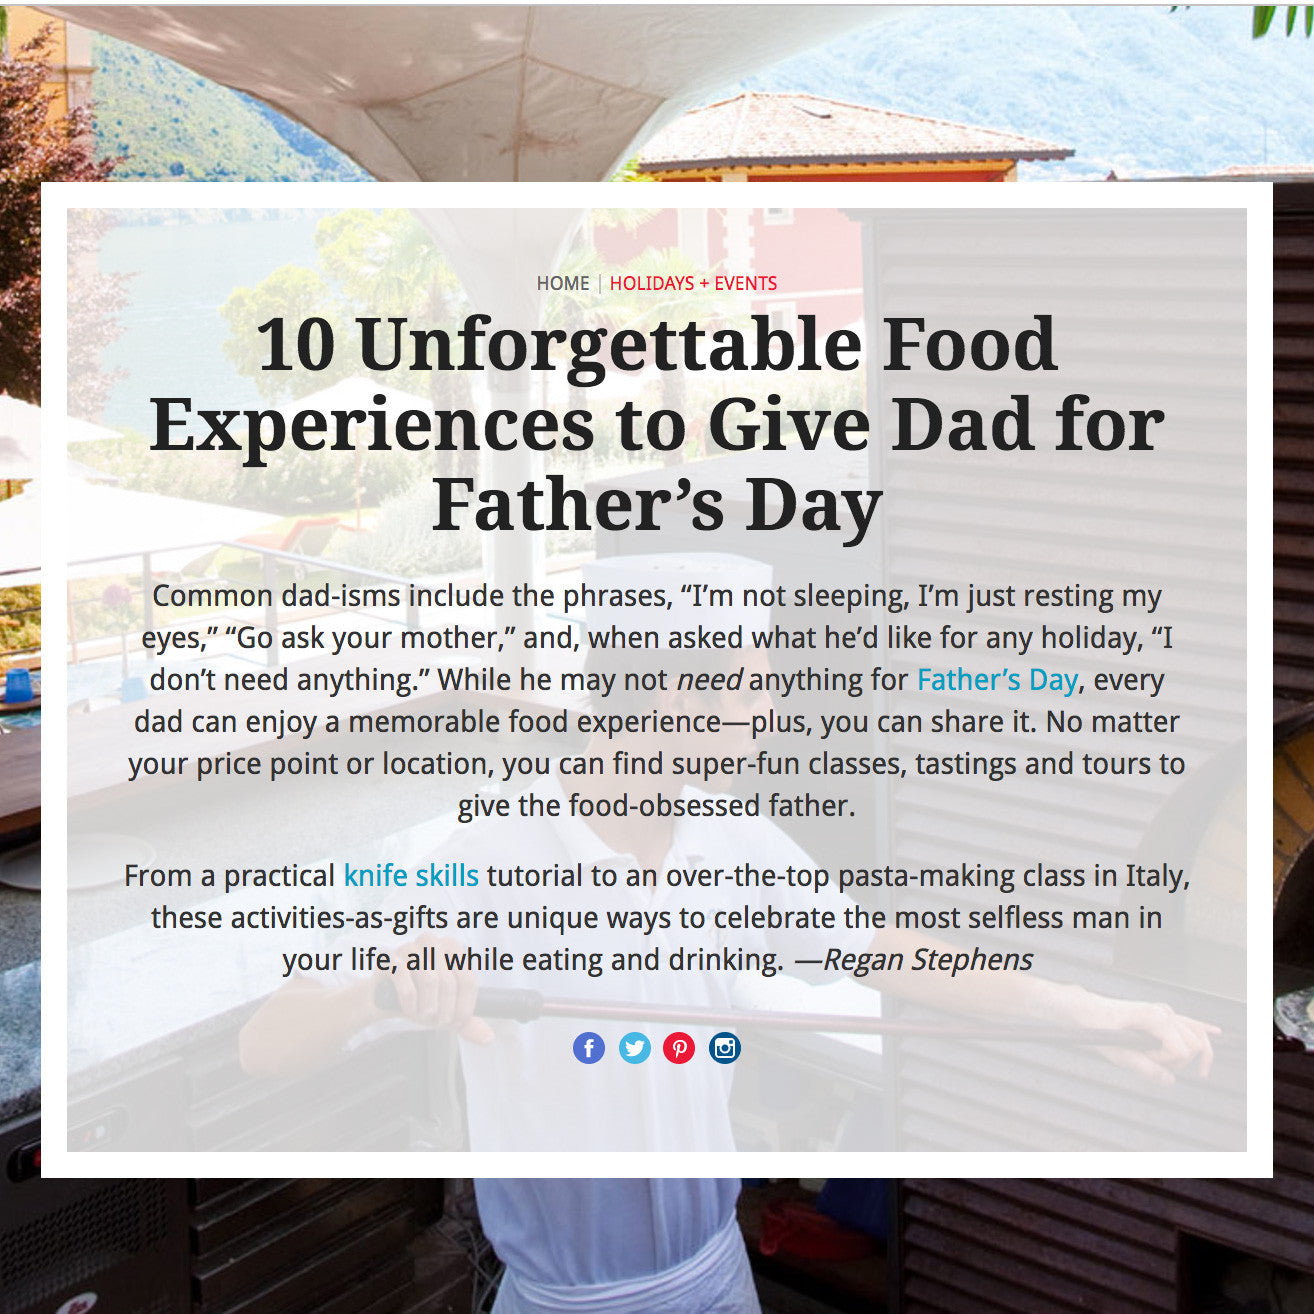 Food & Wine - 10 Unforgettable Food Experiences Father's Day